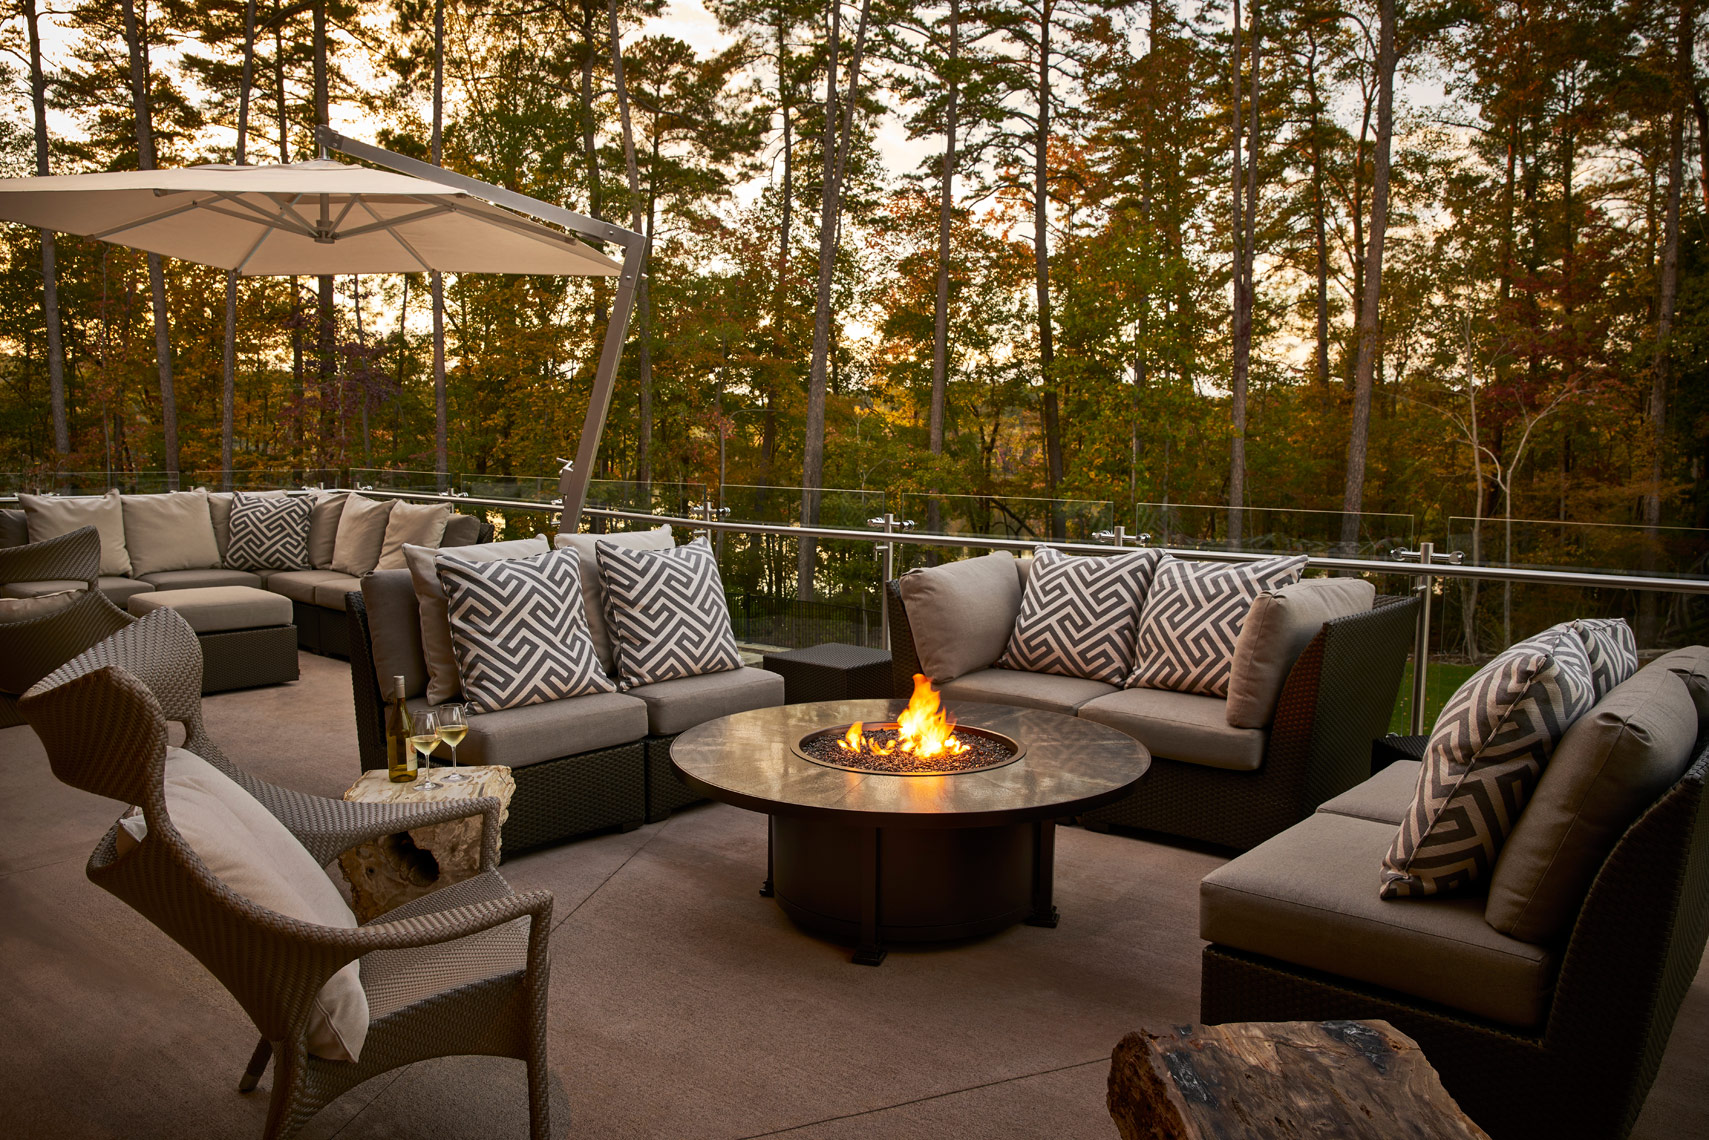 State View Hotel - Fire Pit